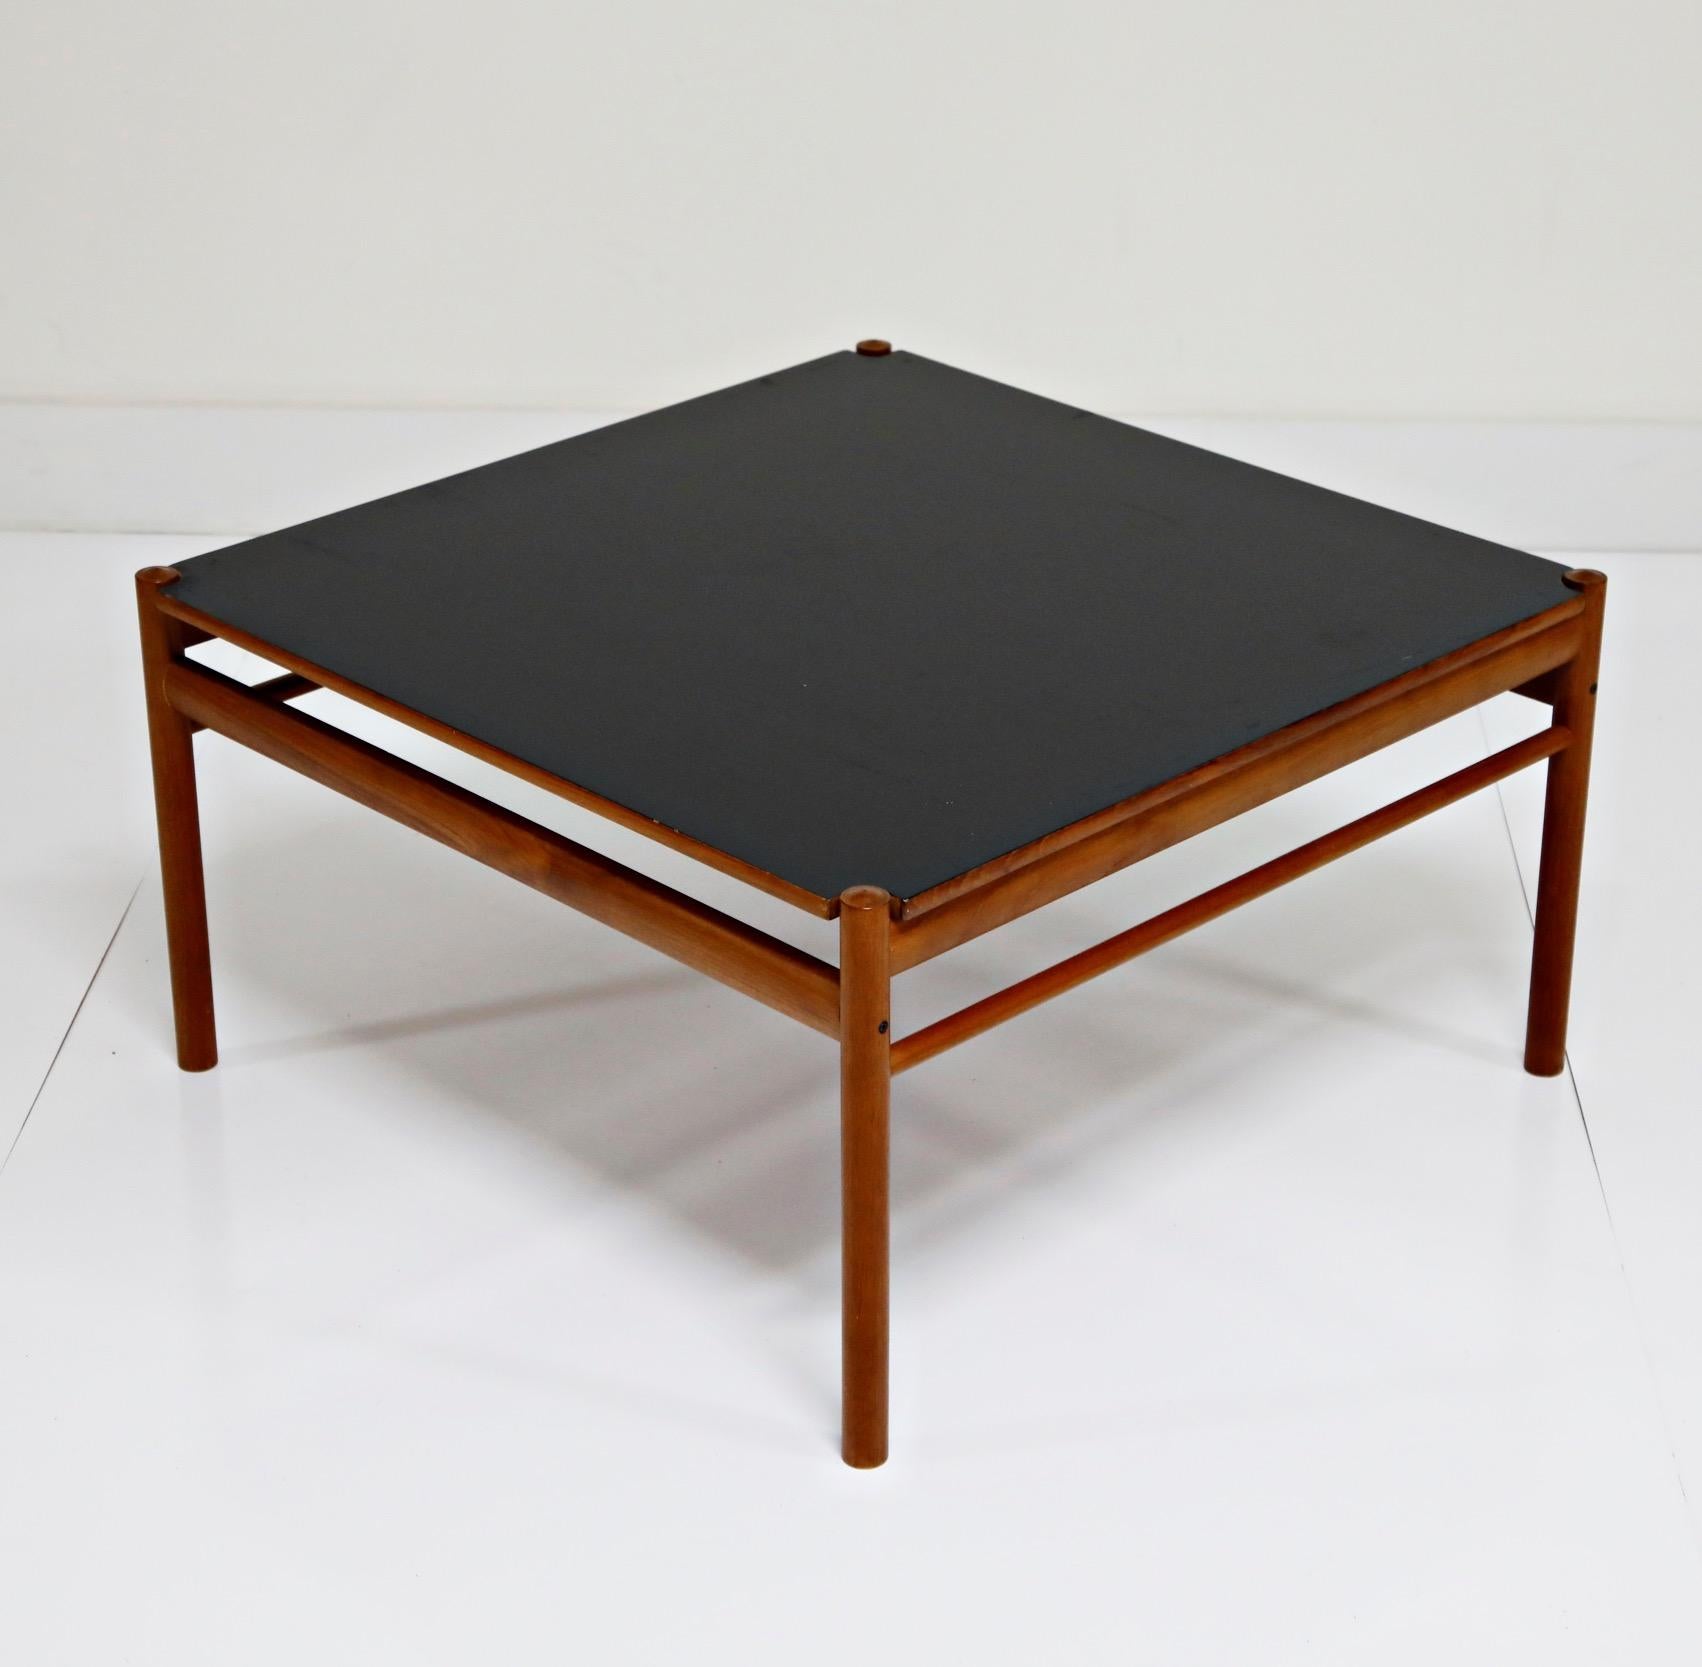 Danish Reversible Teak & Formica Coffee Table by Ole Wanscher for Poul Jeppesen, Signed For Sale